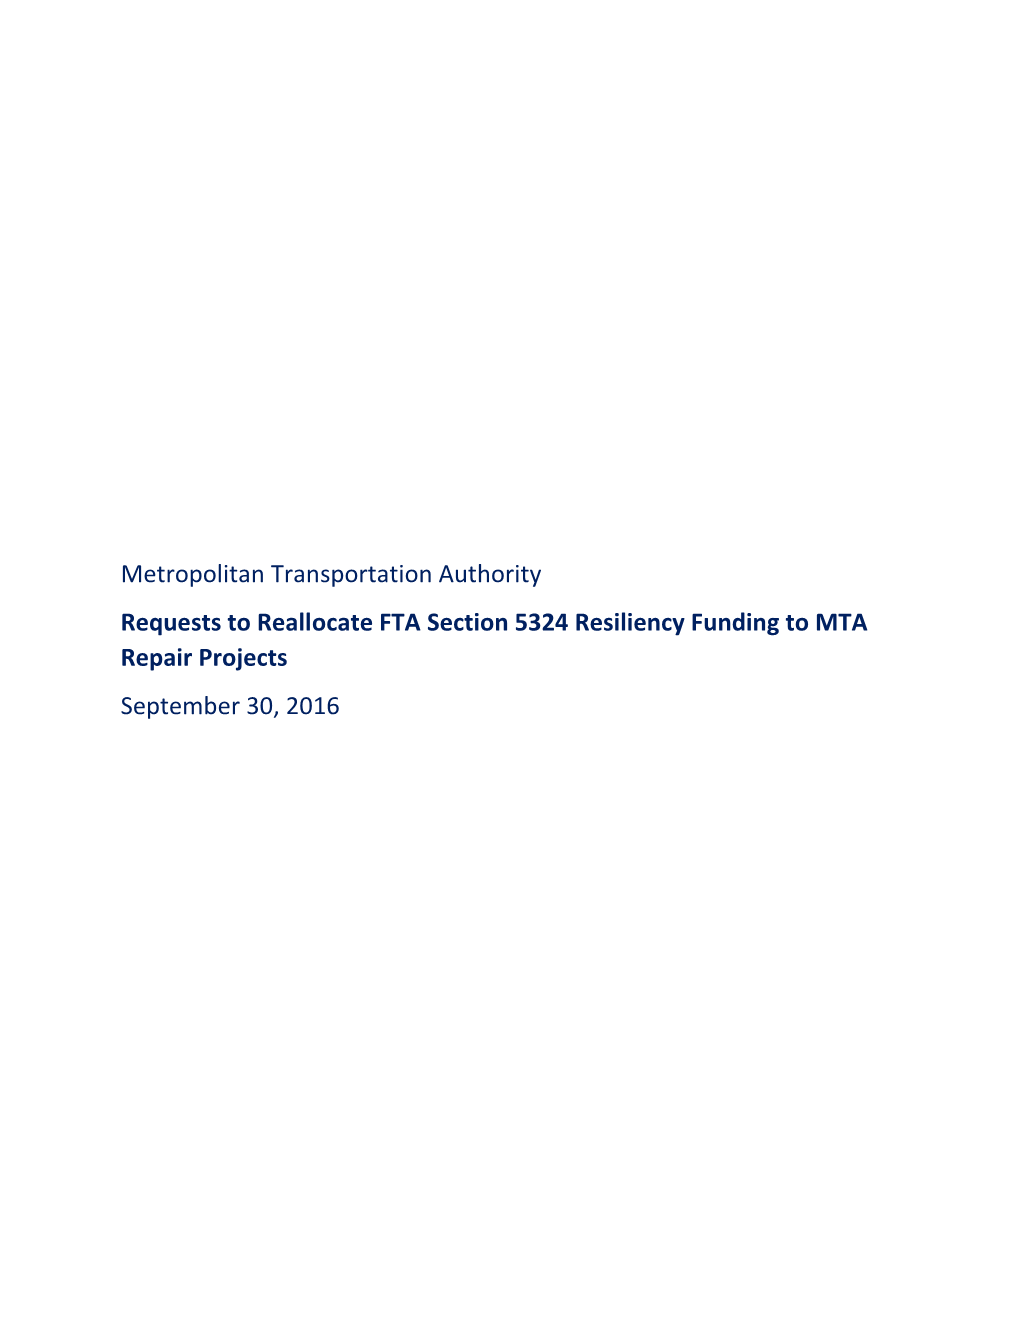 Metropolitan Transportation Authority Requests to Reallocate FTA